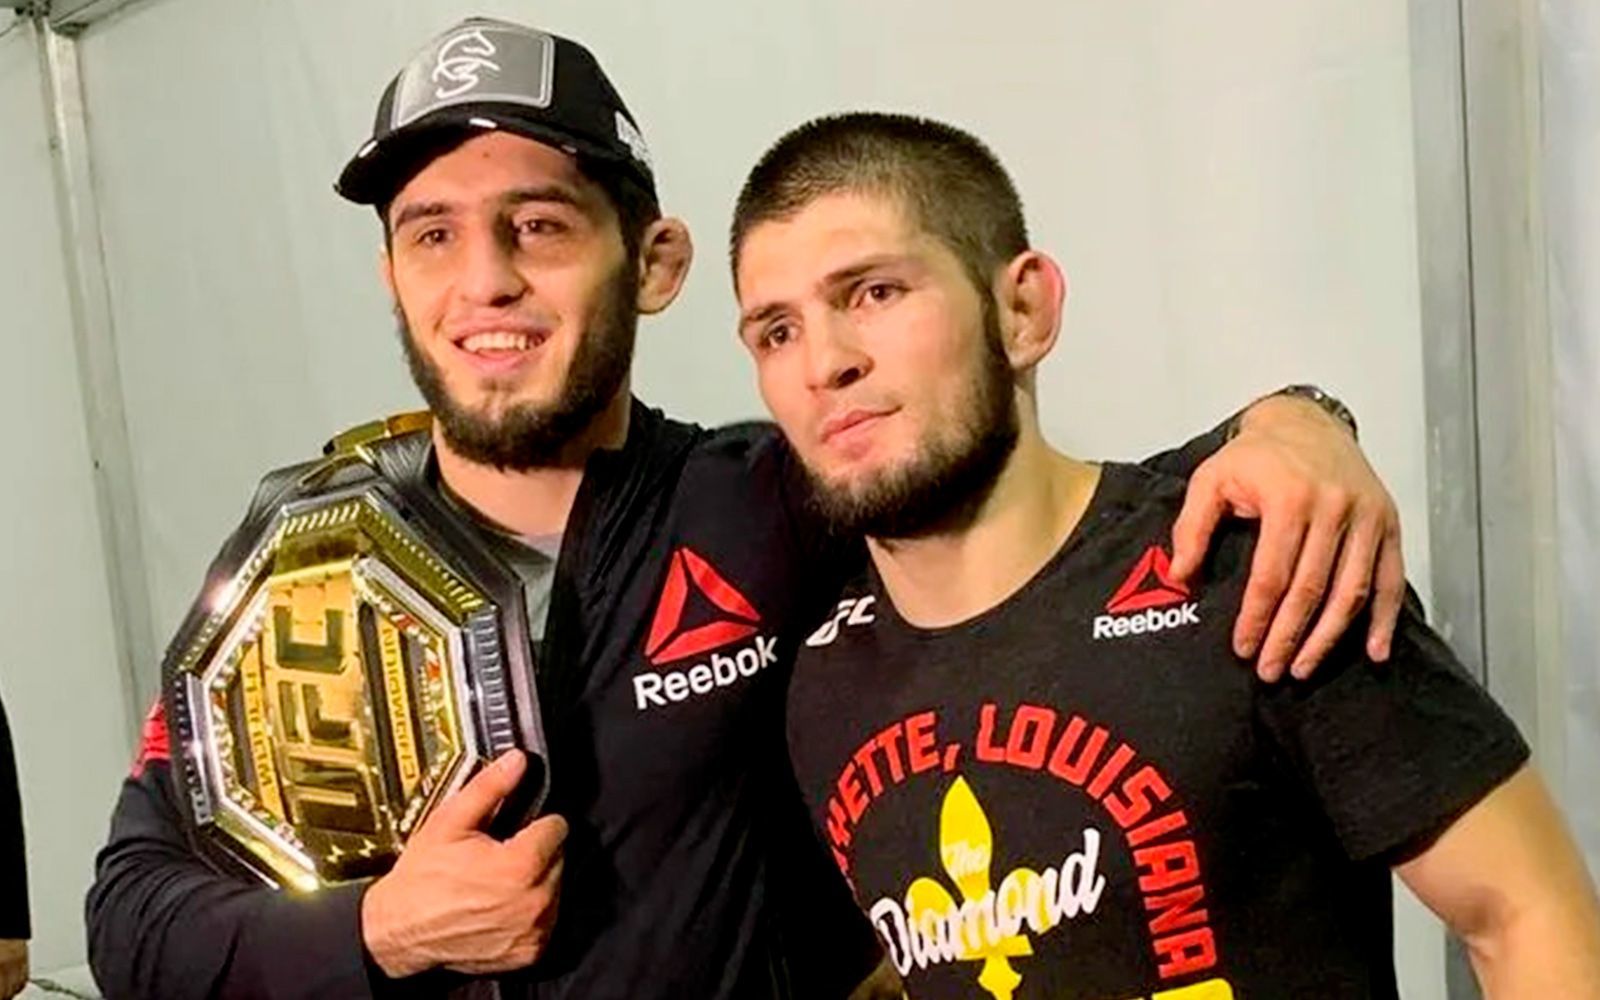 UFC news: Khabib Nurmagomedov spoke about the upcoming fight between Islam Makhachev and Rafael dos Anjos.